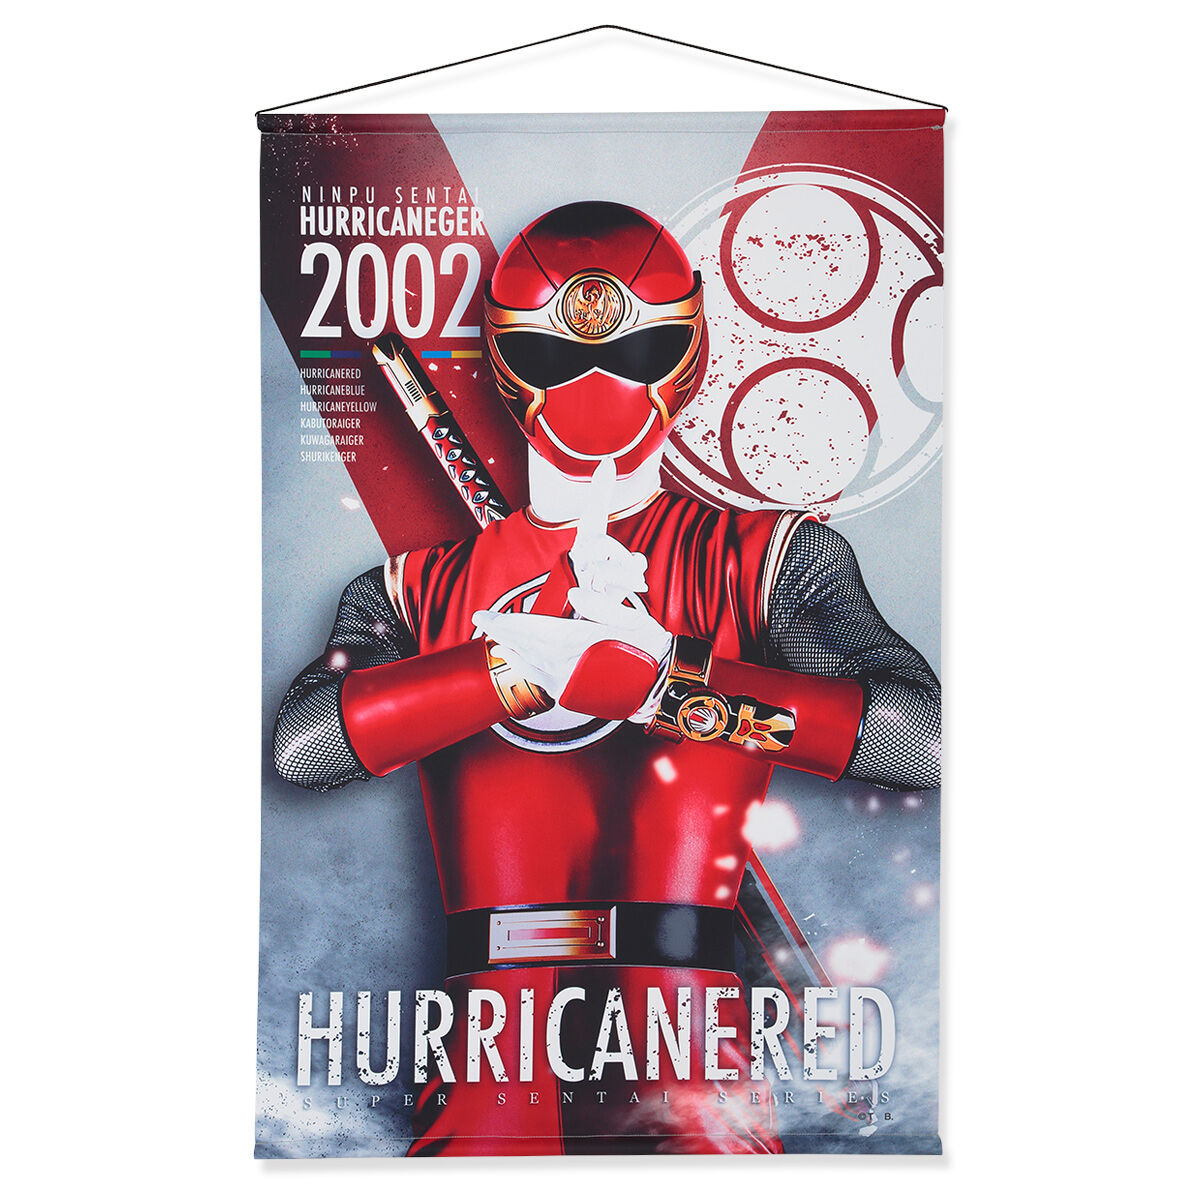 [PREORDER] Hurricaneger Wall Tapestries